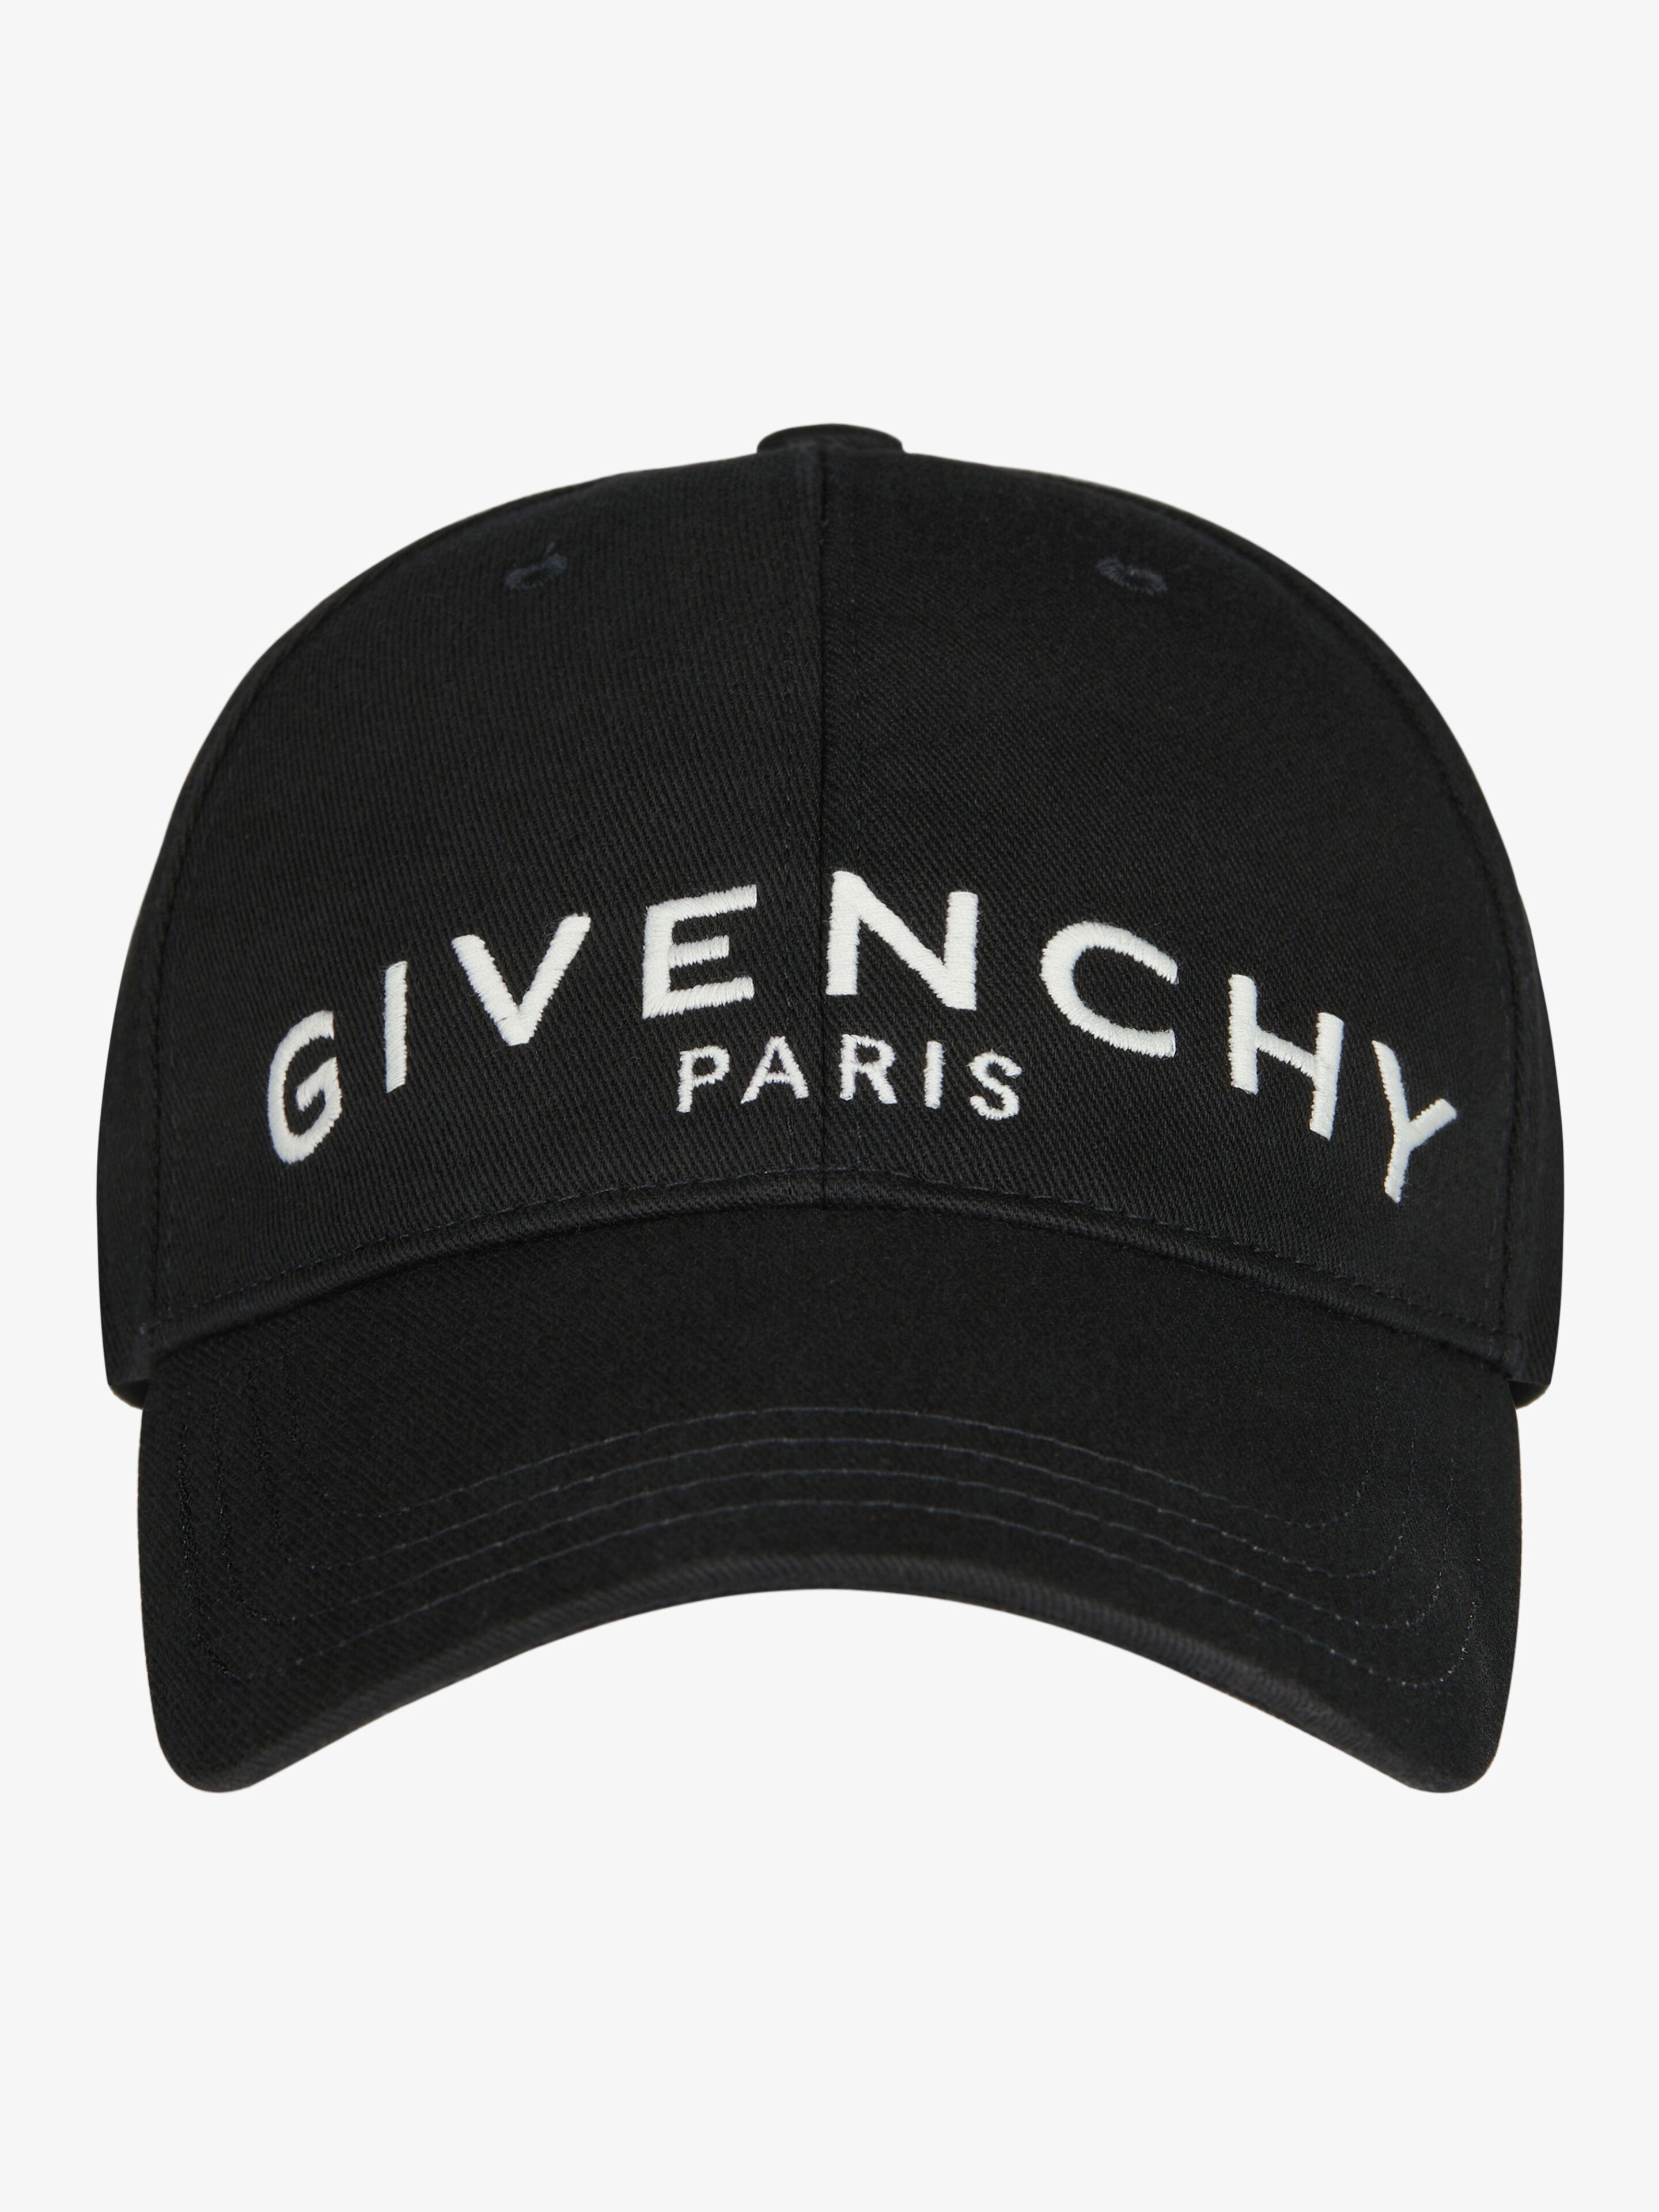 GIVENCHY PARIS EMBROIDERED CAP - 2